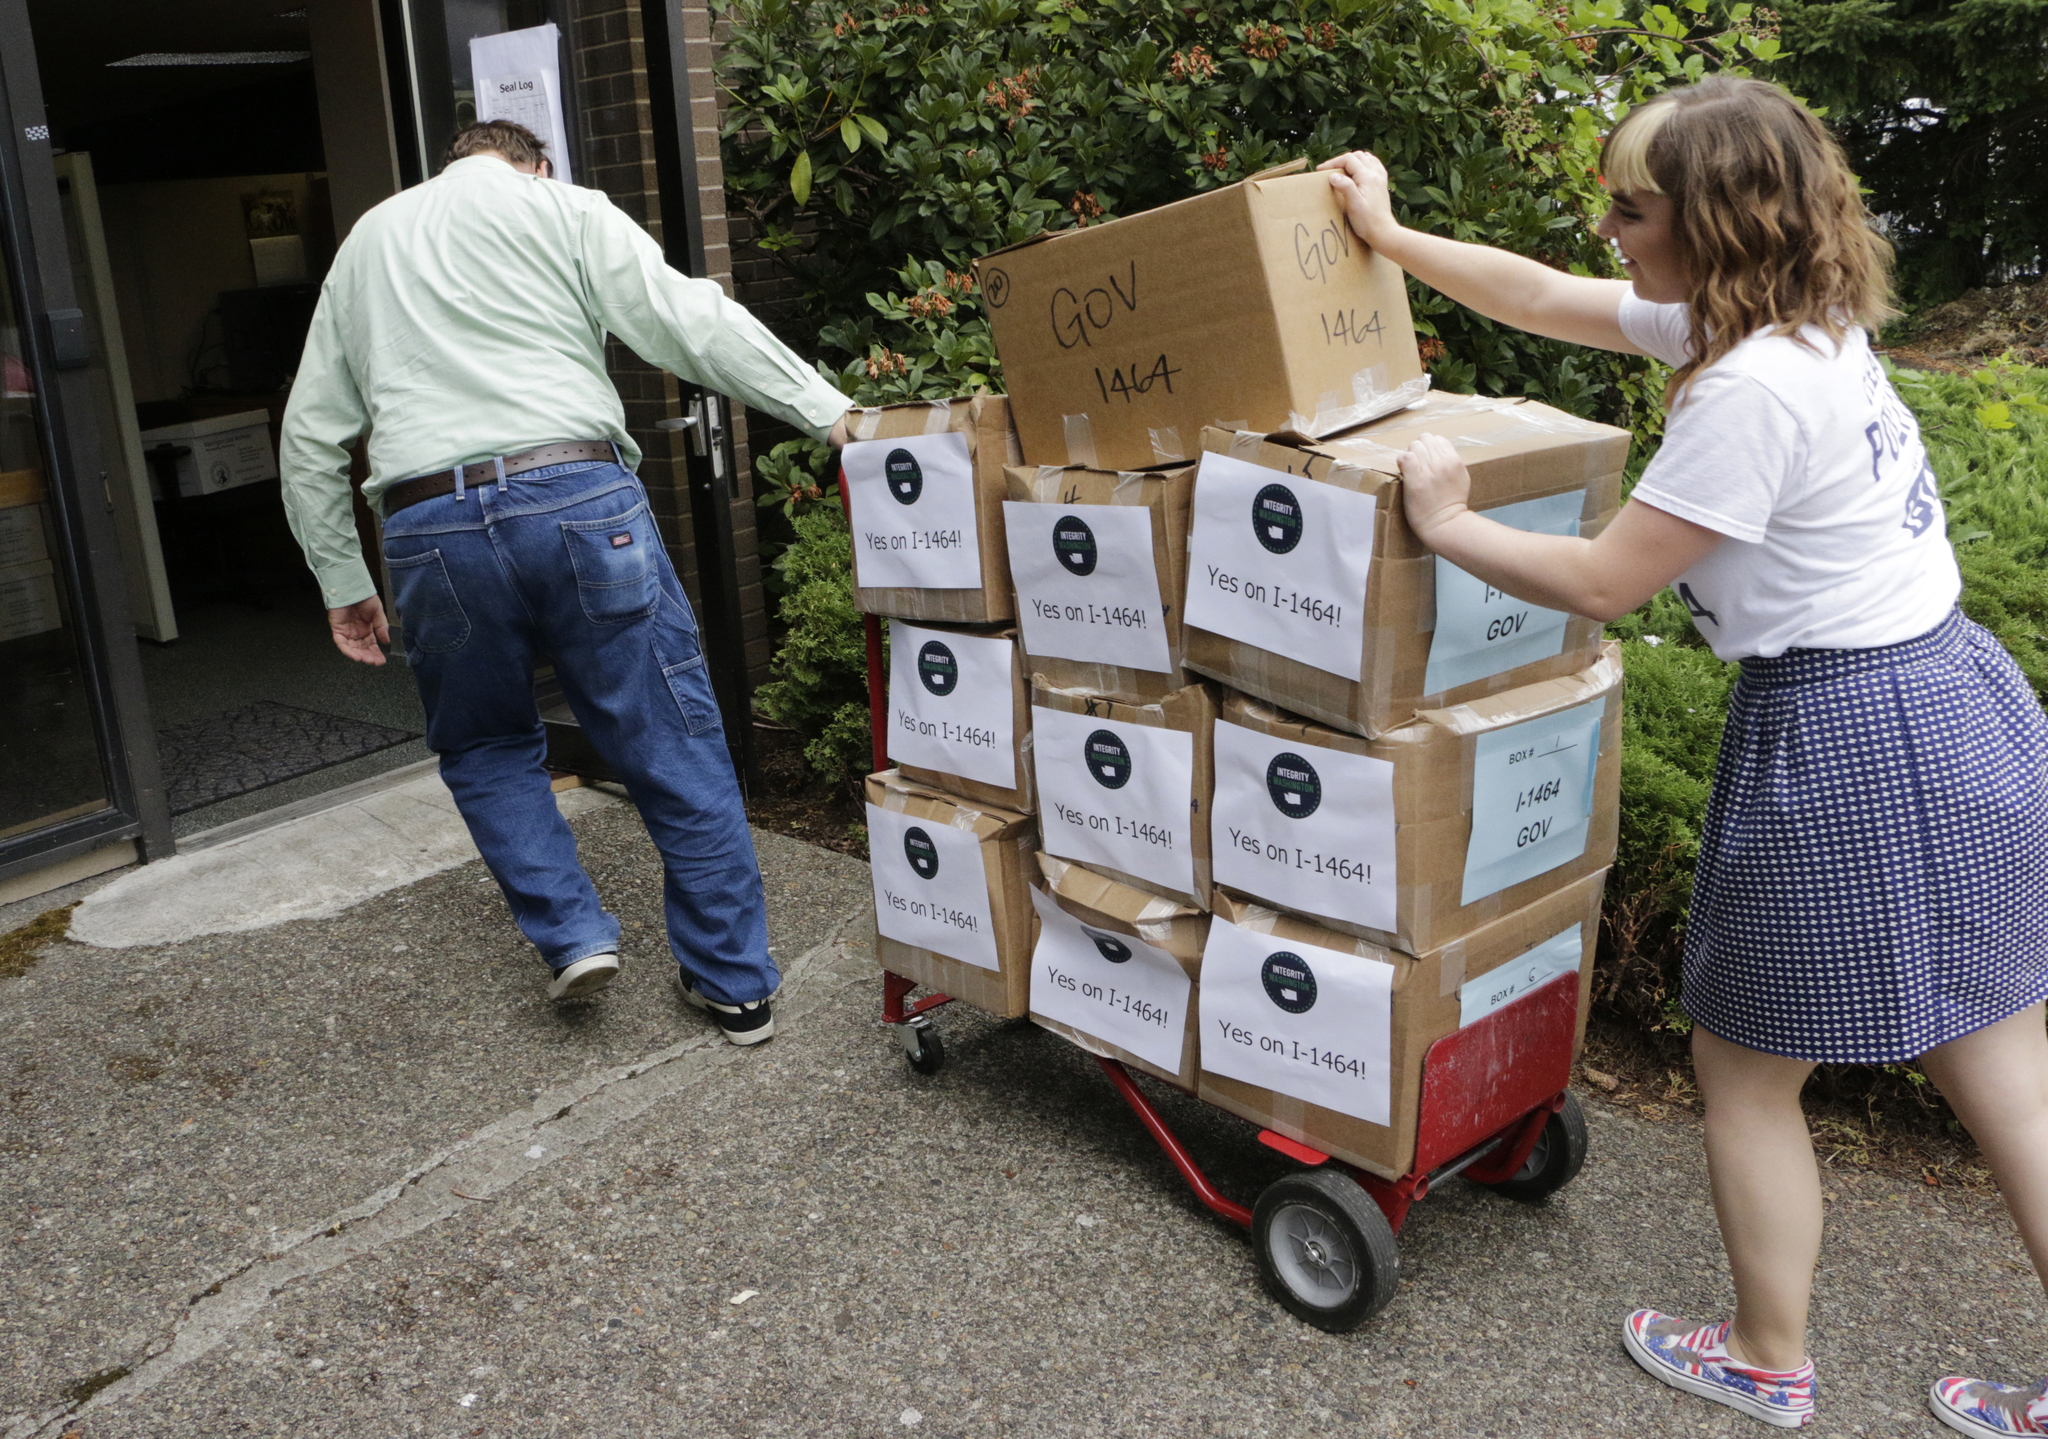 Supporters of a proposed campaign finance reform ballot measure arrive to turn in boxes of signed petitions in Olympia in July. (Rachel La Corte/The Associated Press)